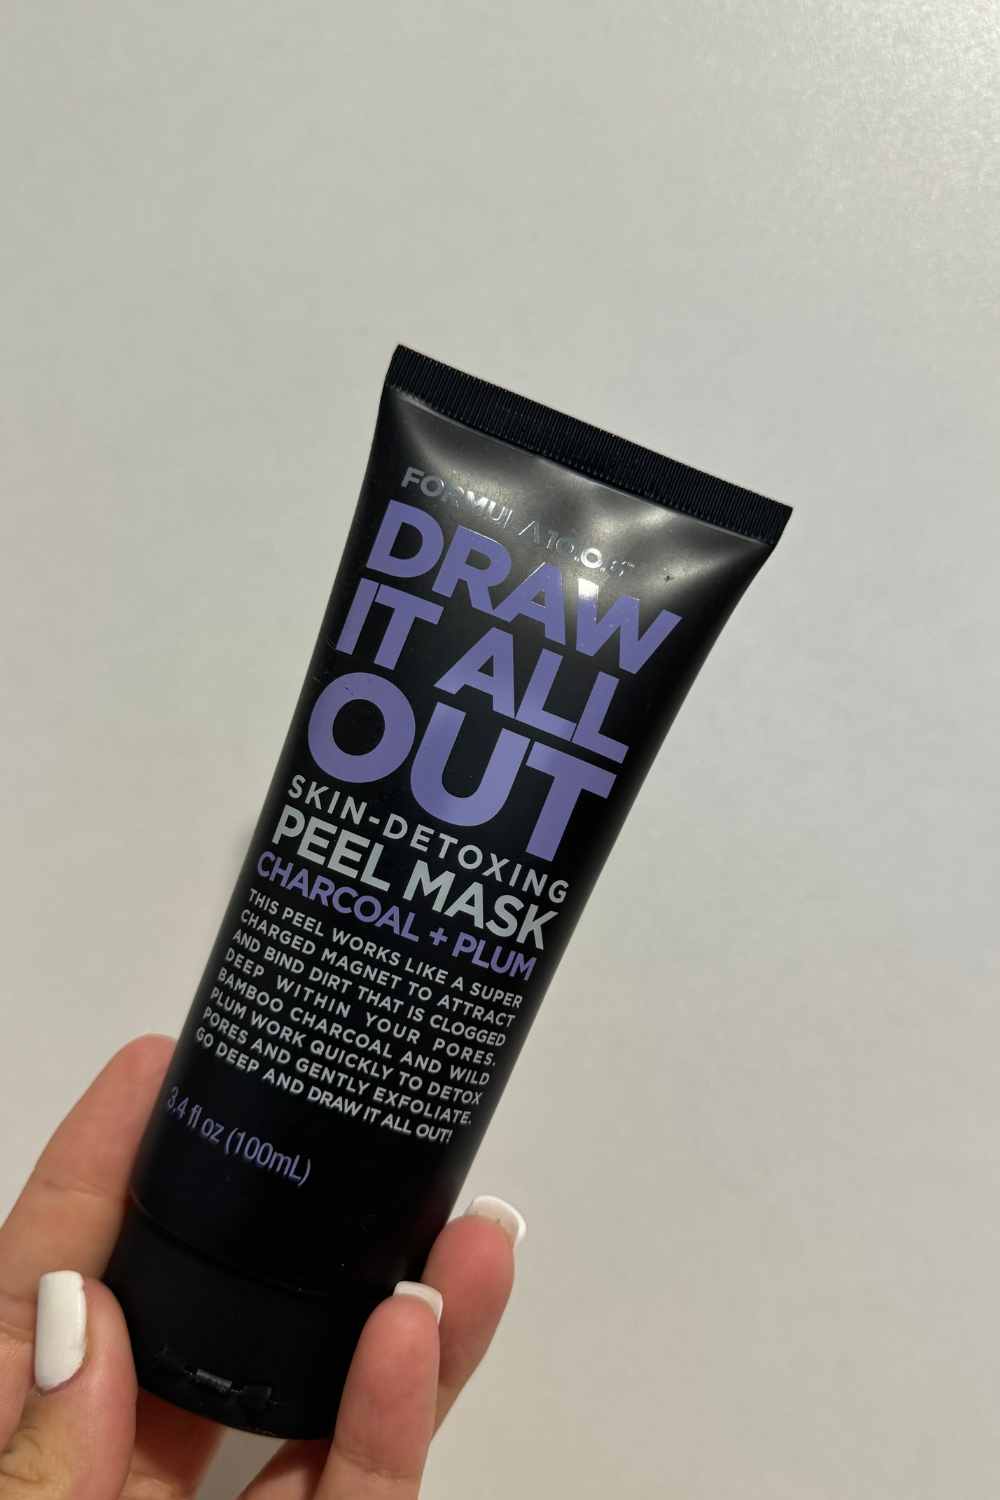 Formula 10.0.6's Draw It All Out Skin Detoxifying Mask.